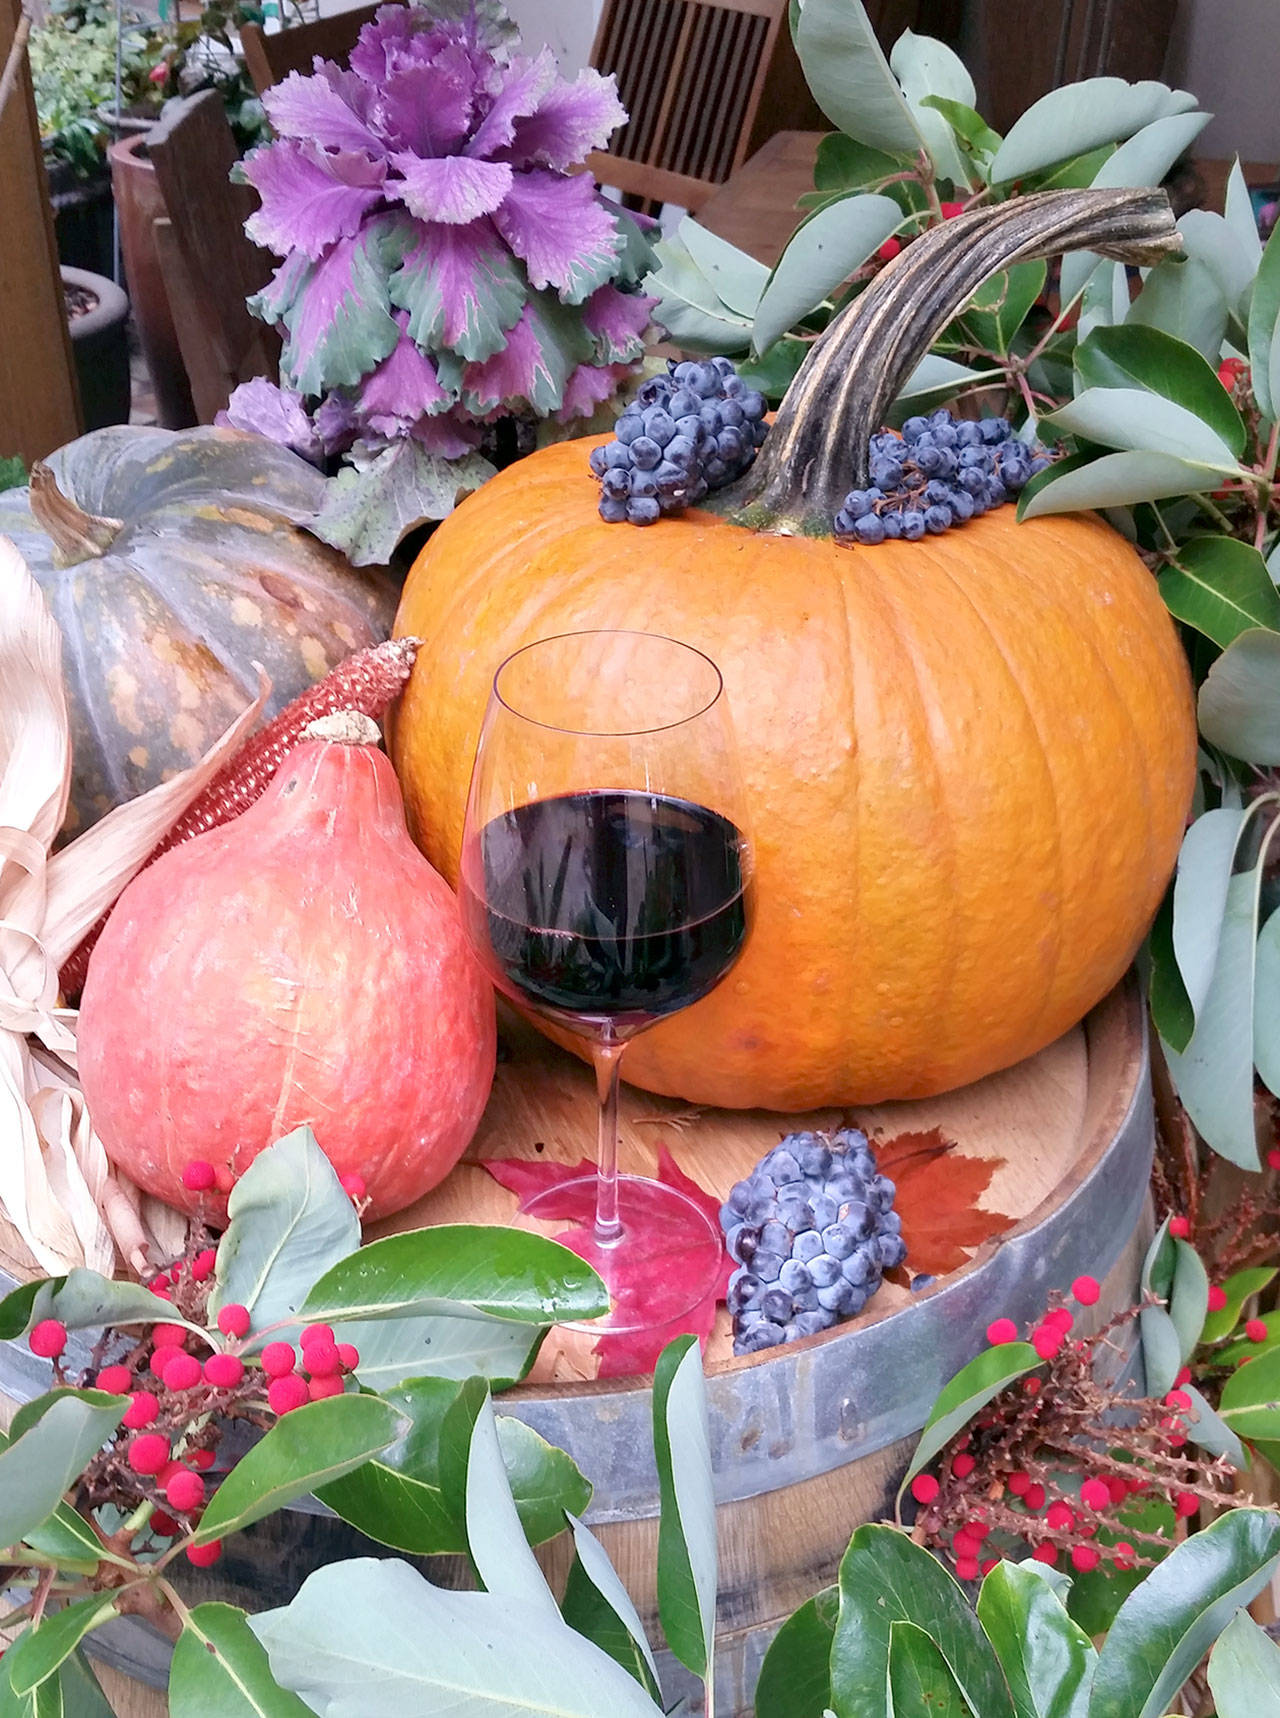 The annual Harvest Wine Tour takes place this weekend from 11 a.m. to 5 p.m. Saturday and Sunday at 10 participating wineries and cideries across the Olympic Peninsula. (Vicki Corson)